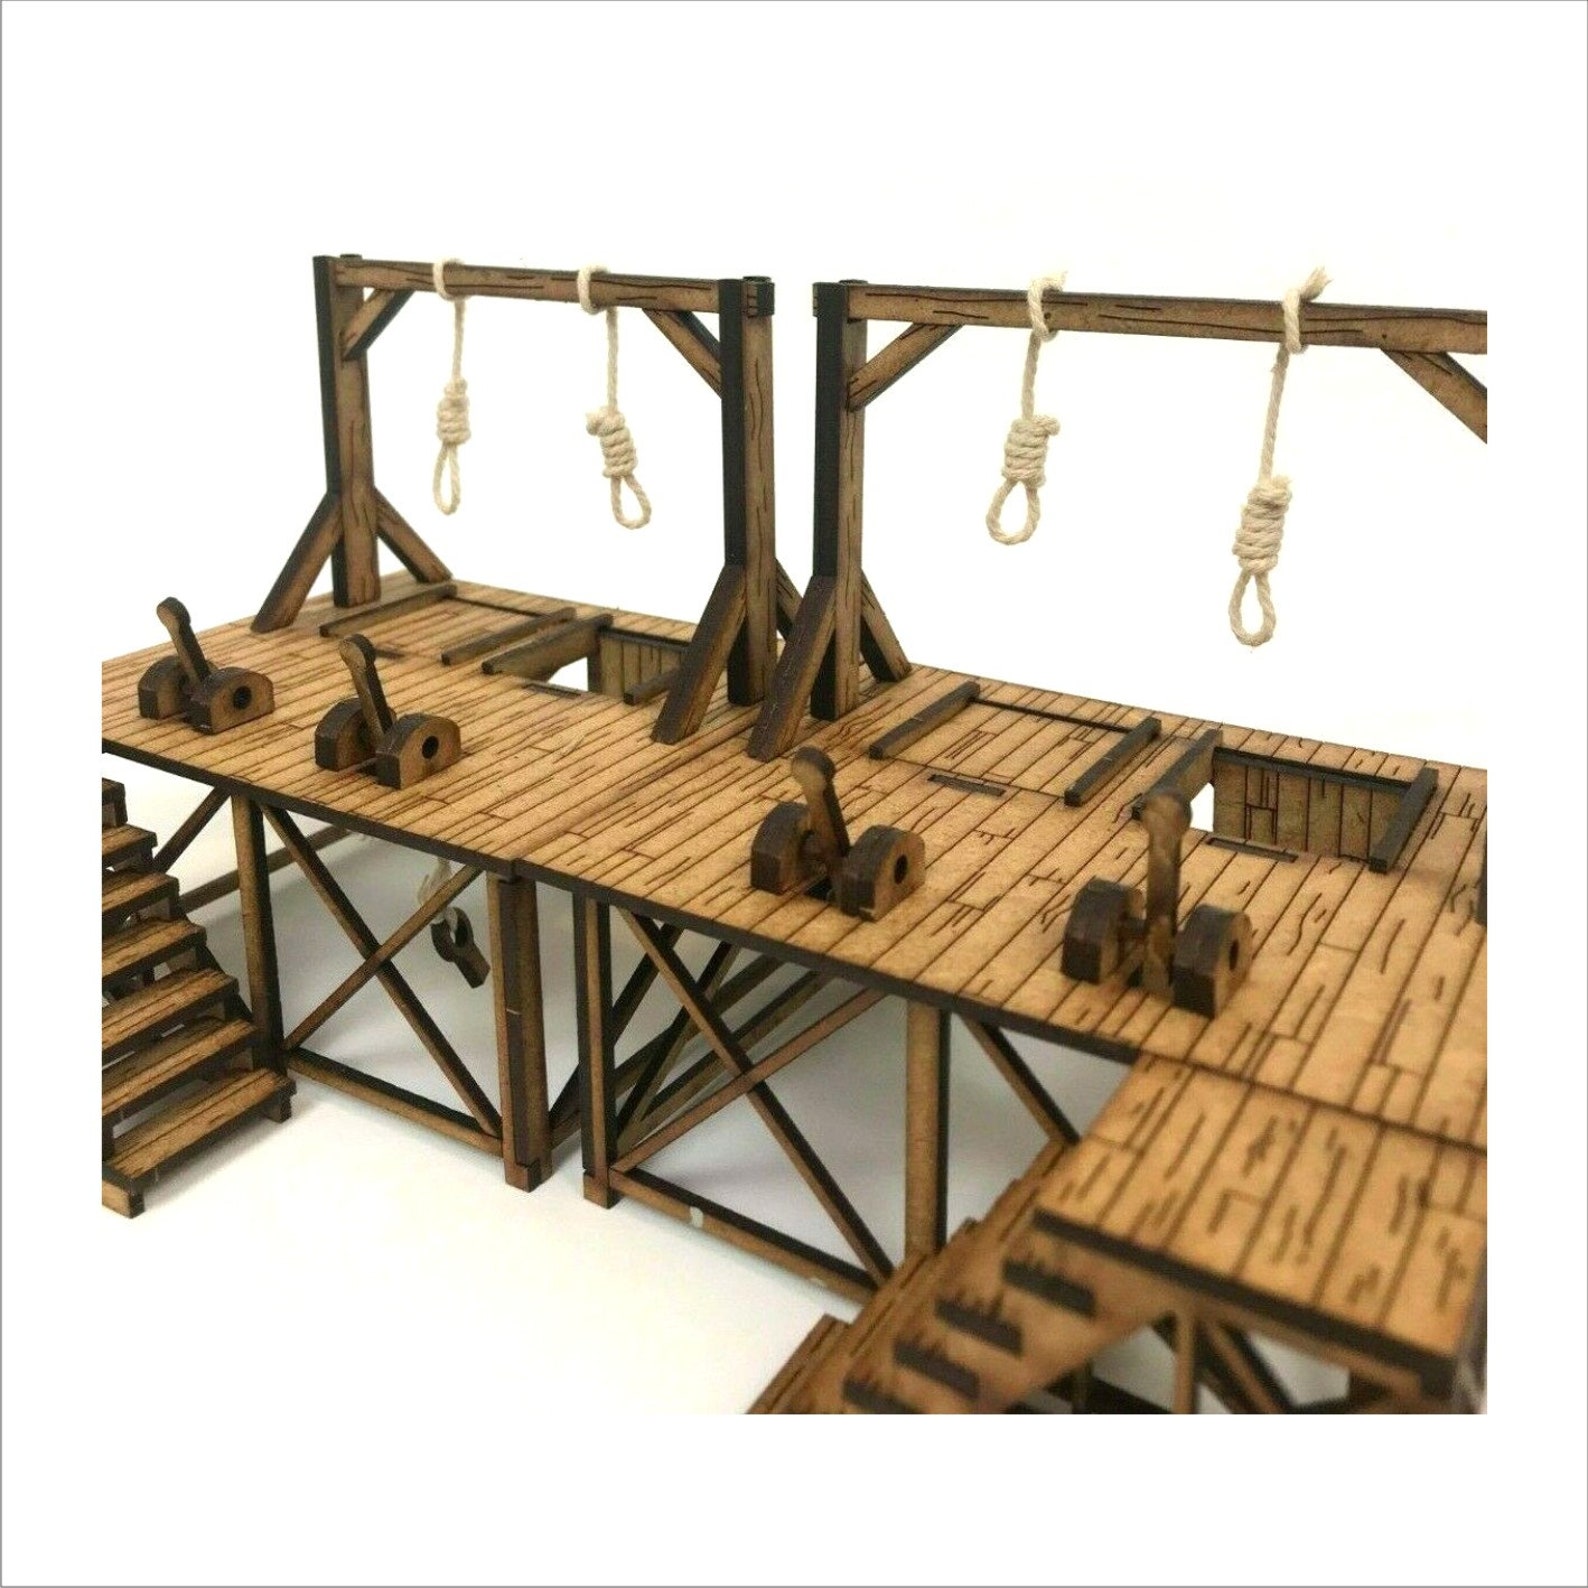 Mm Old Wild West Hangman Gallows Set Mdf Terrain Perfect For Etsy